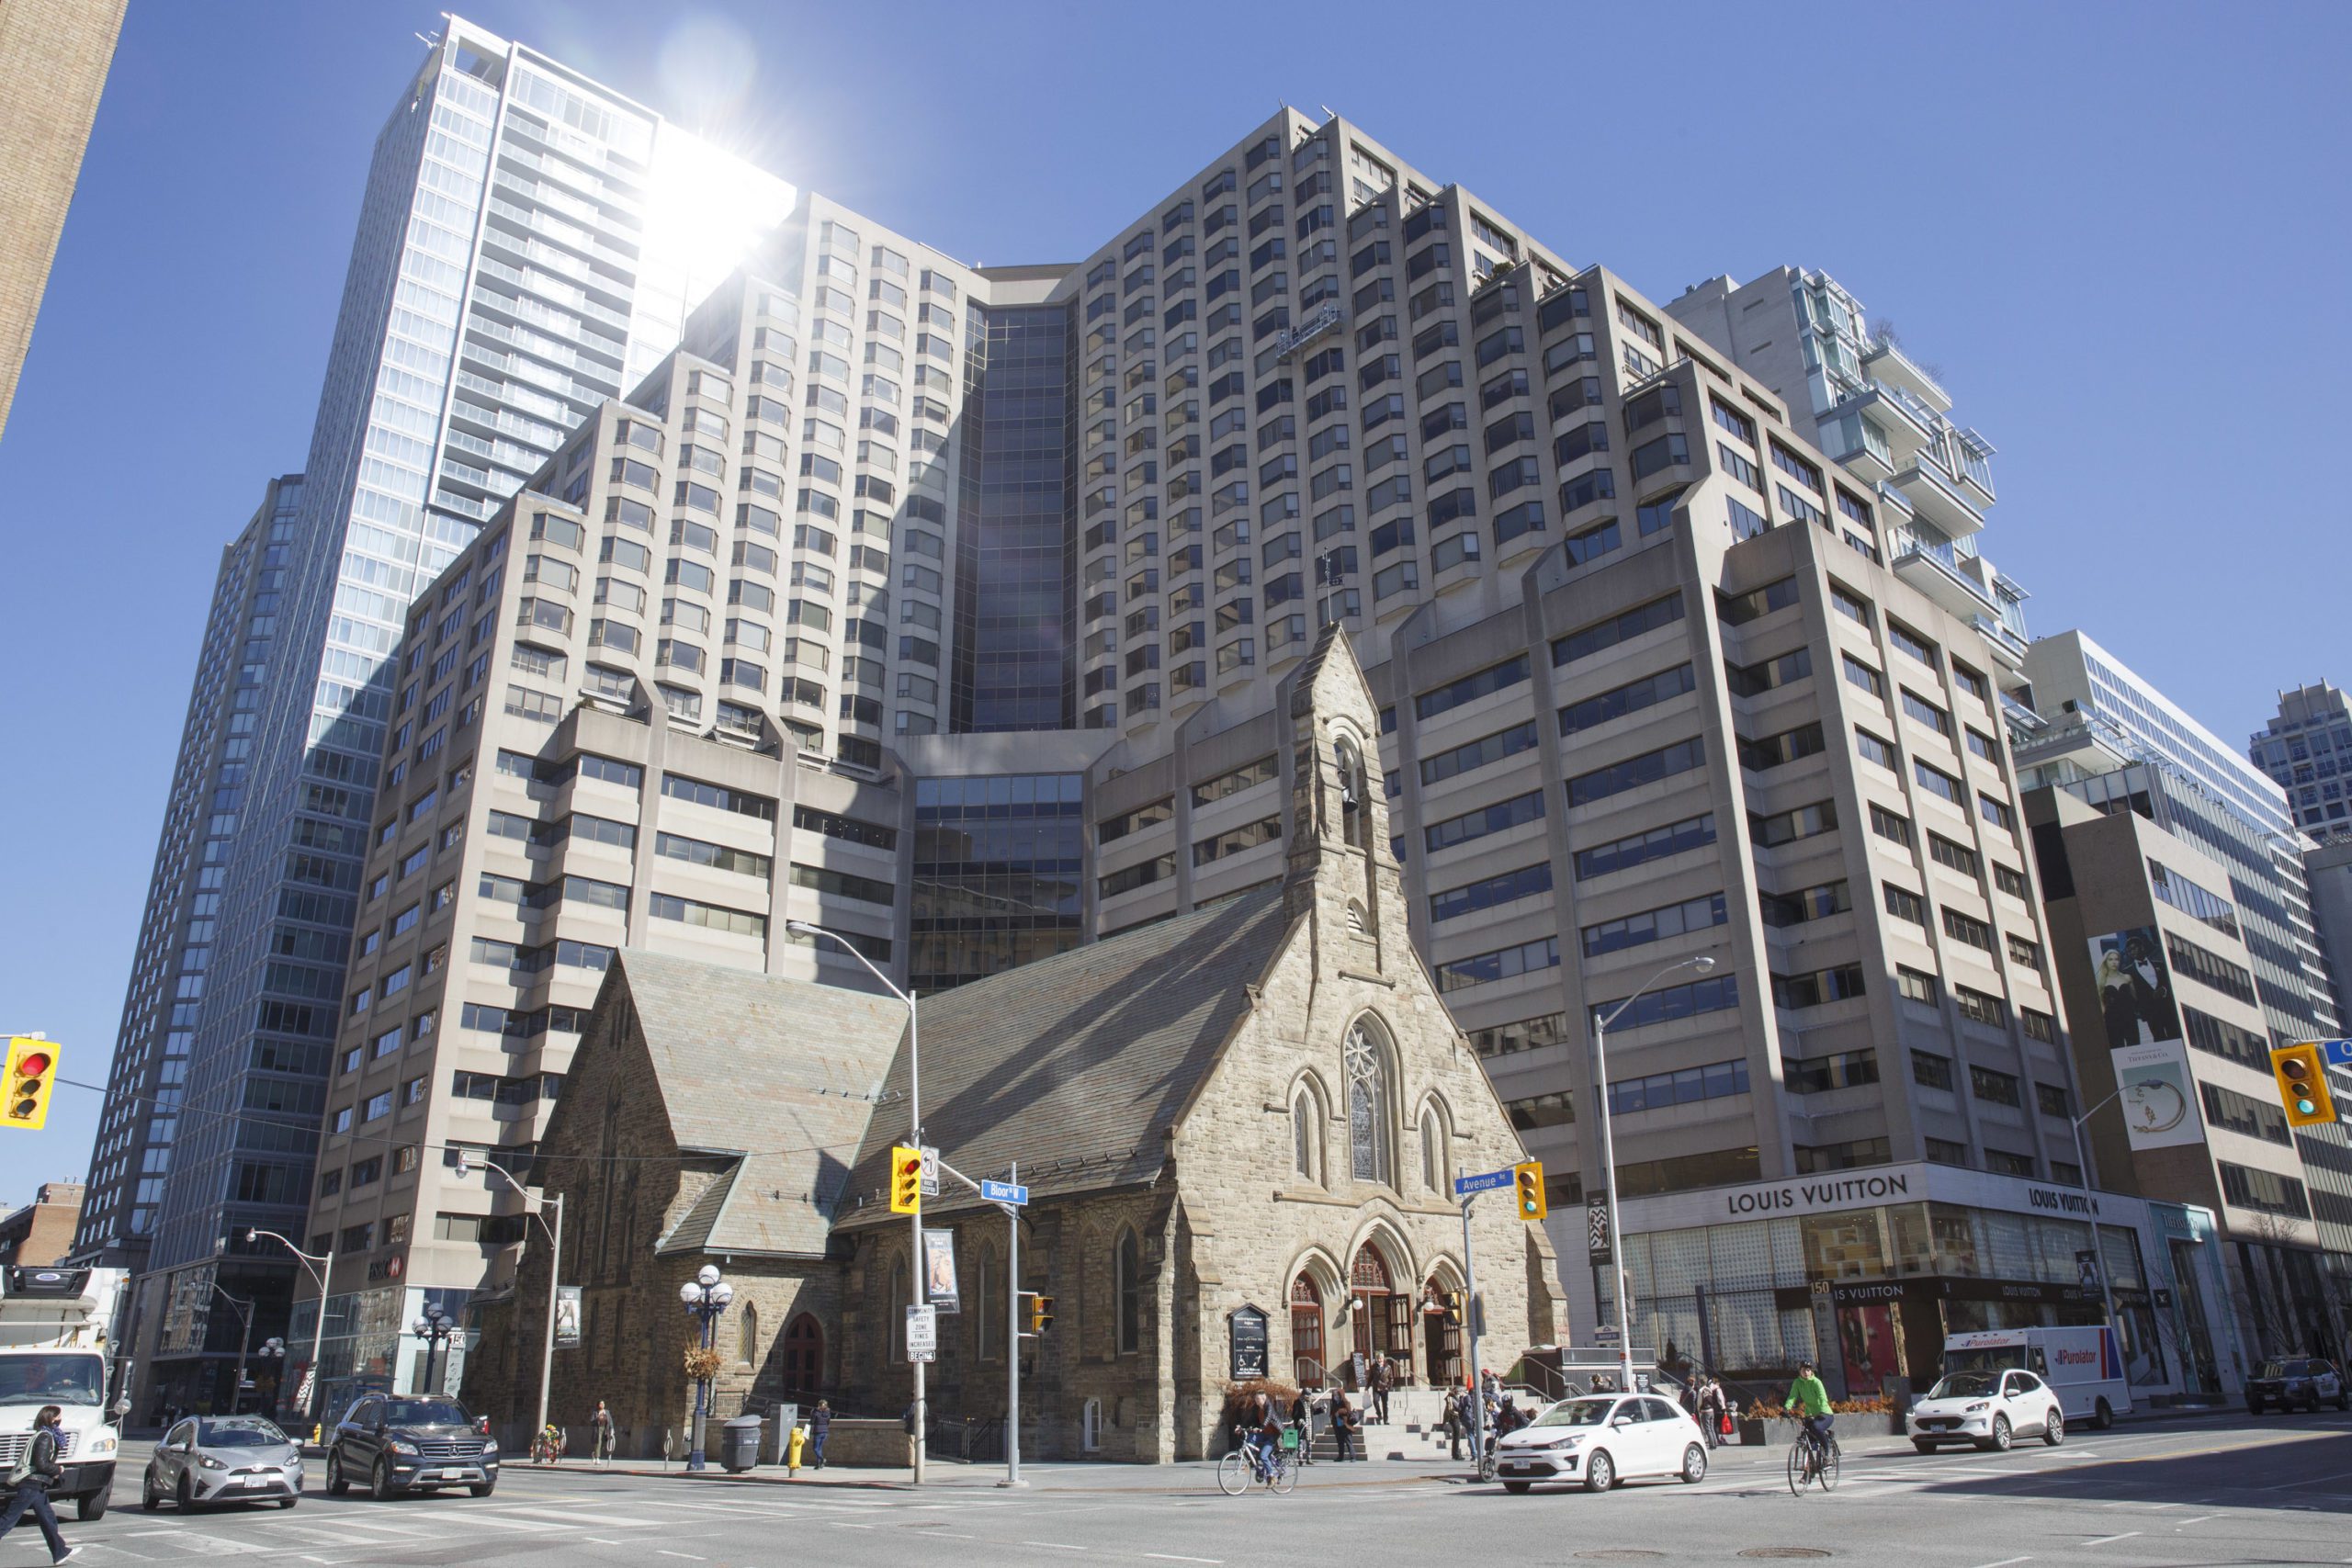 Church of the Redeemer with the Four Seasons Renaissance Centre and high-rises.